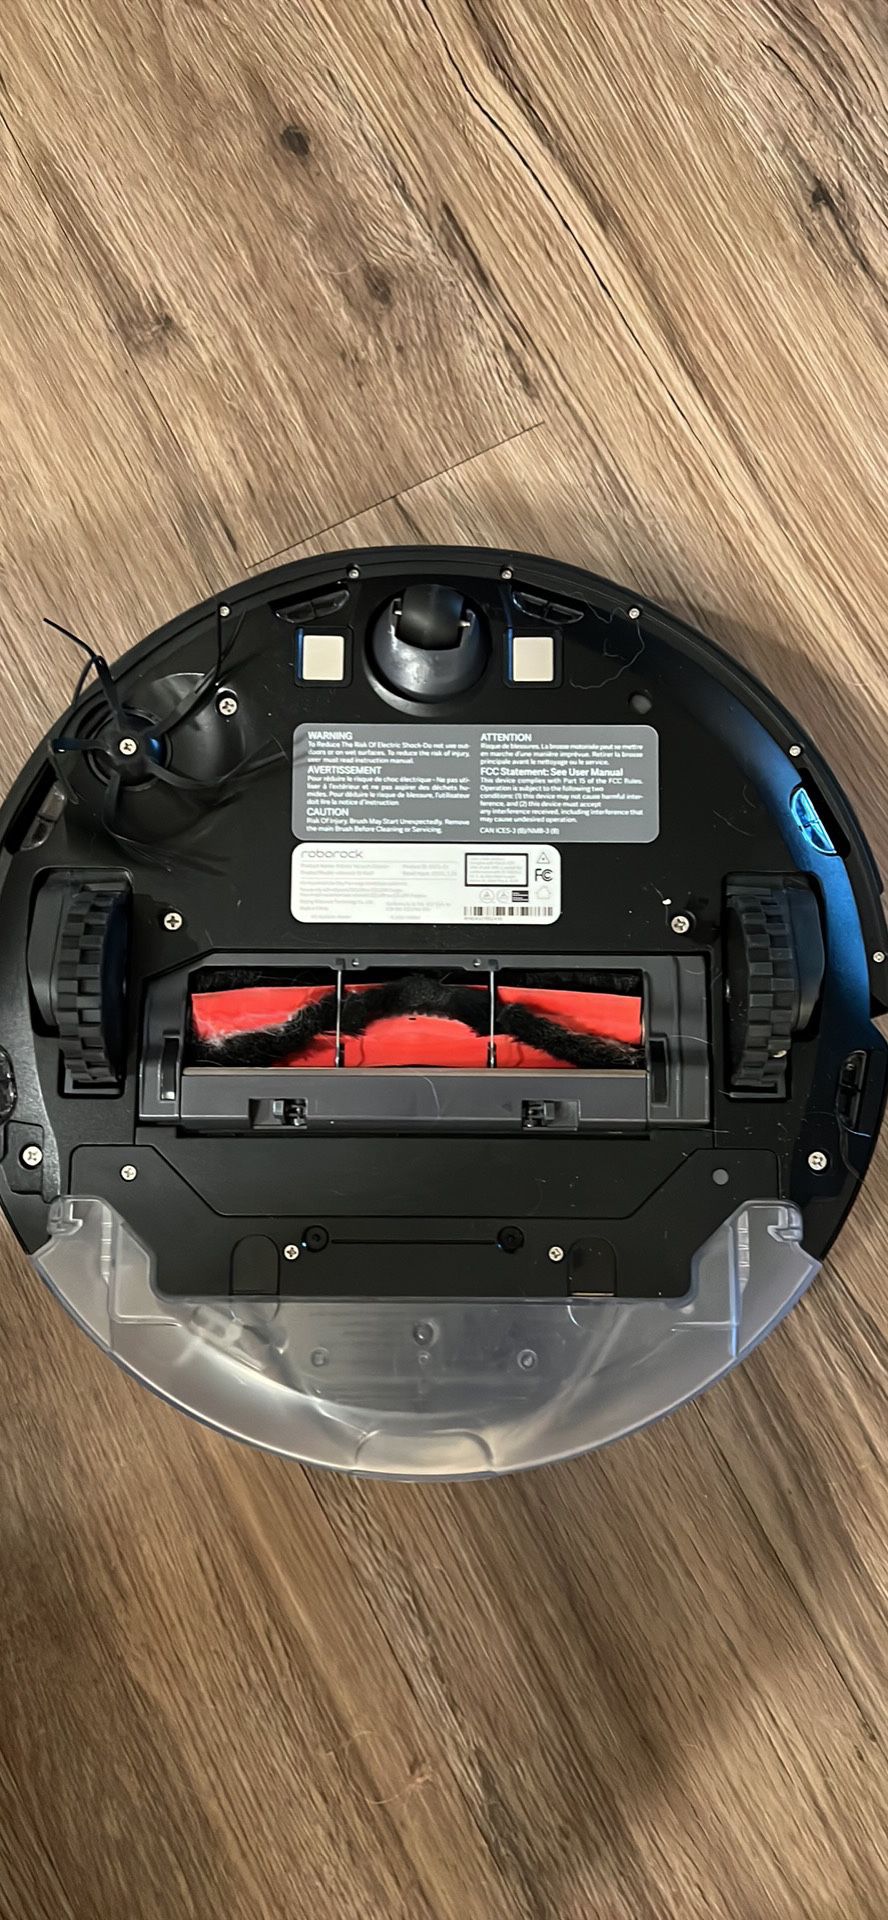 Roborock S6 MaxV Robot Vacuum Cleaner with ReactiveAI and Intelligent Mopping